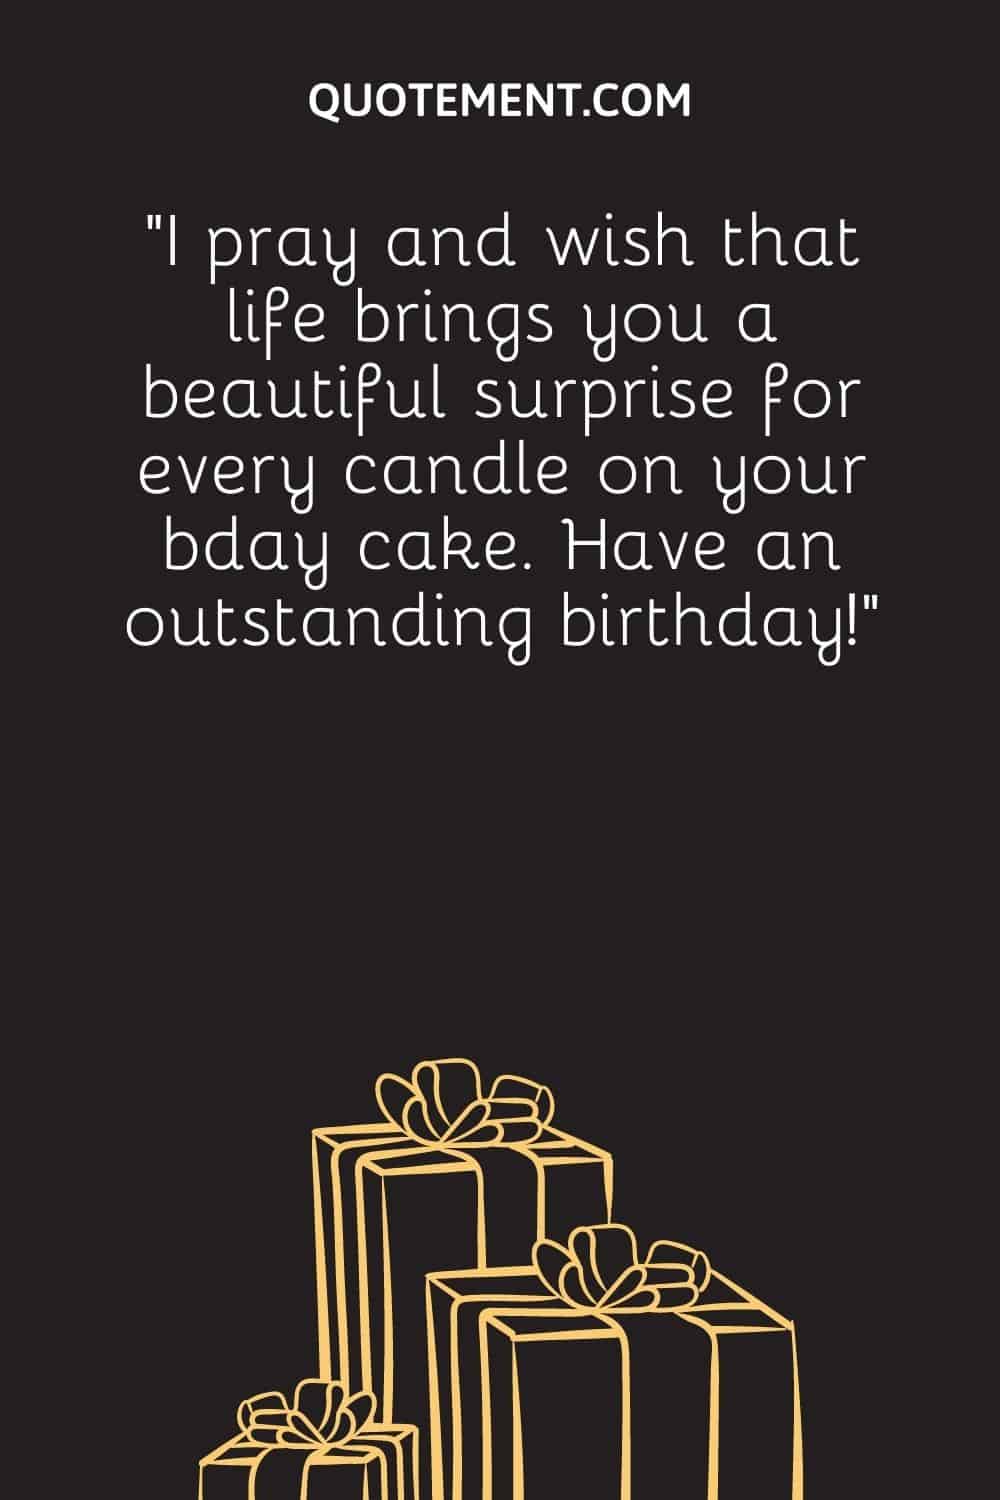 “I pray and wish that life brings you a beautiful surprise for every candle on your bday cake. Have an outstanding birthday!”